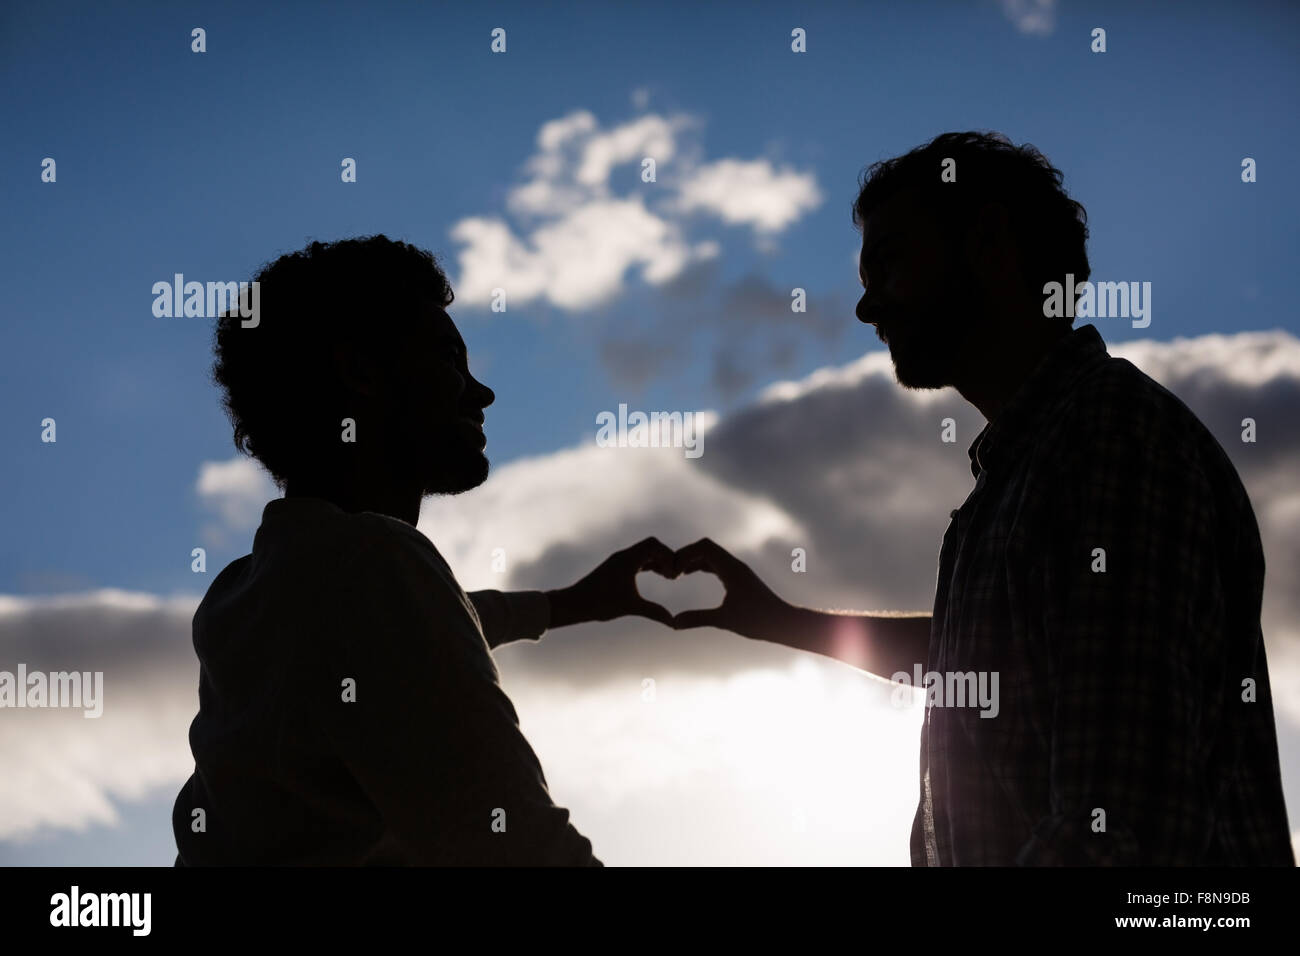 Homosexual couple making hearth with hands Stock Photo